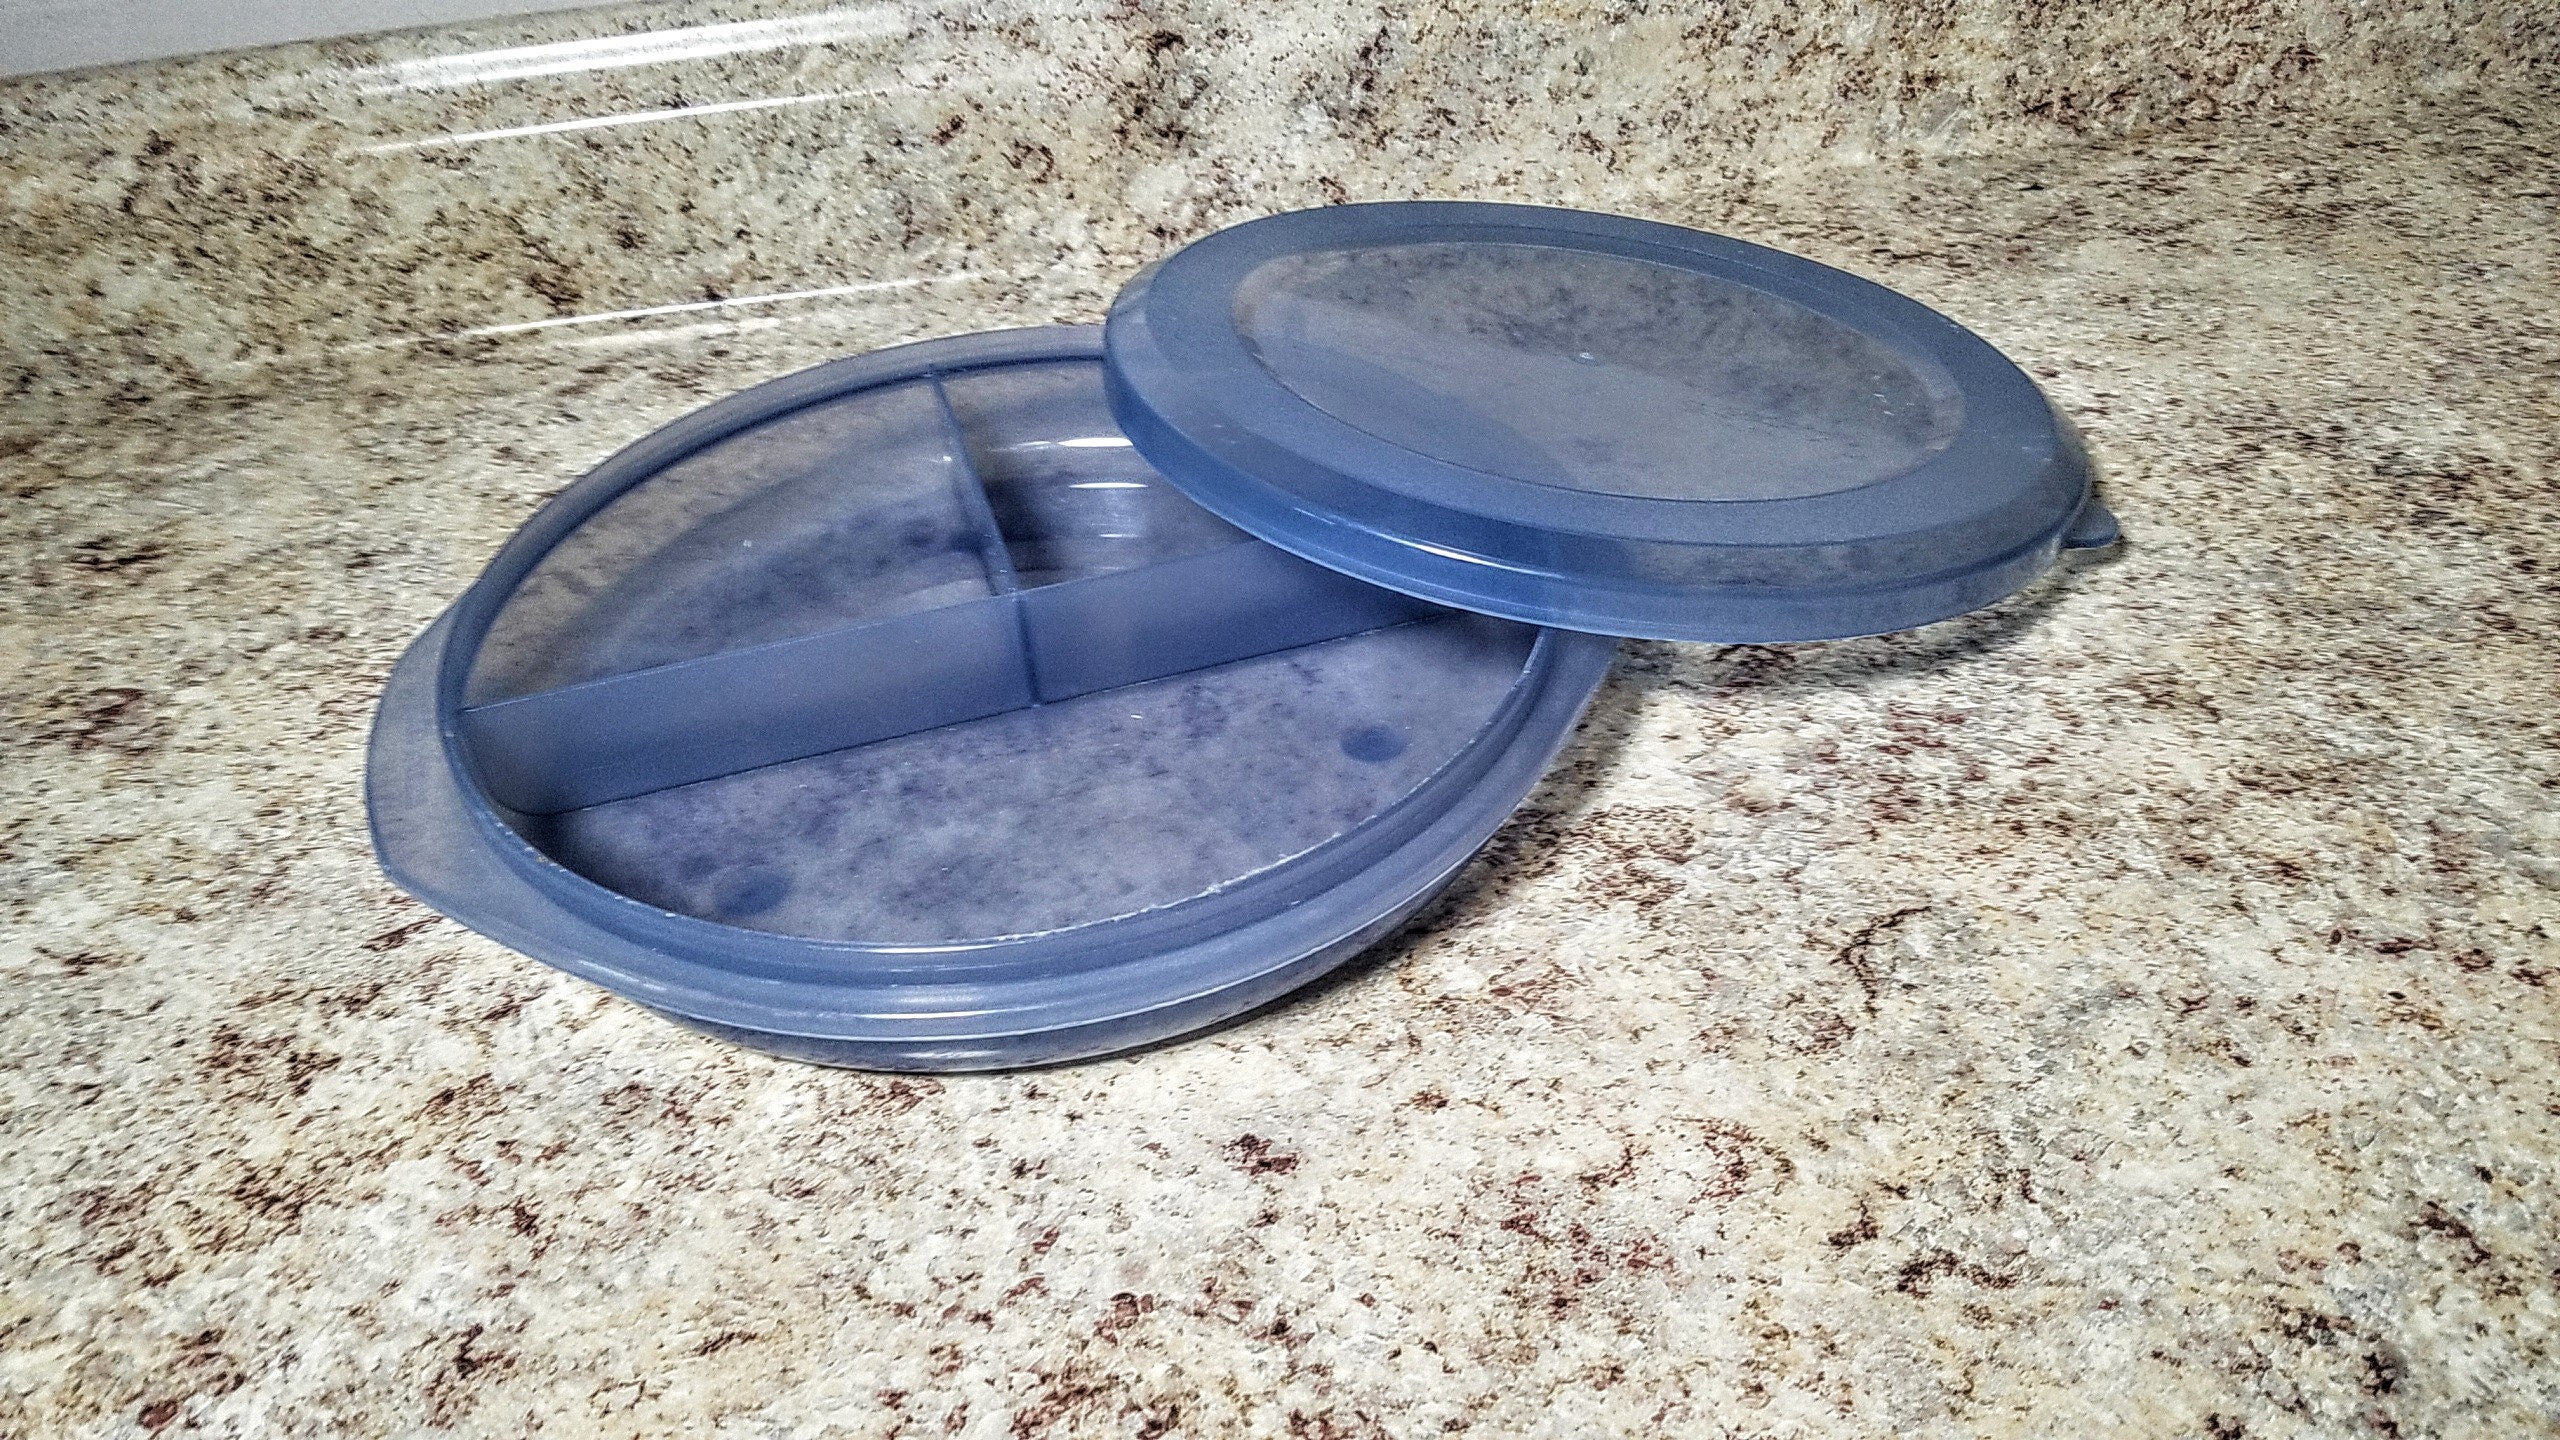 High Sided Divided Plate with Lid : large dish with 3 sections